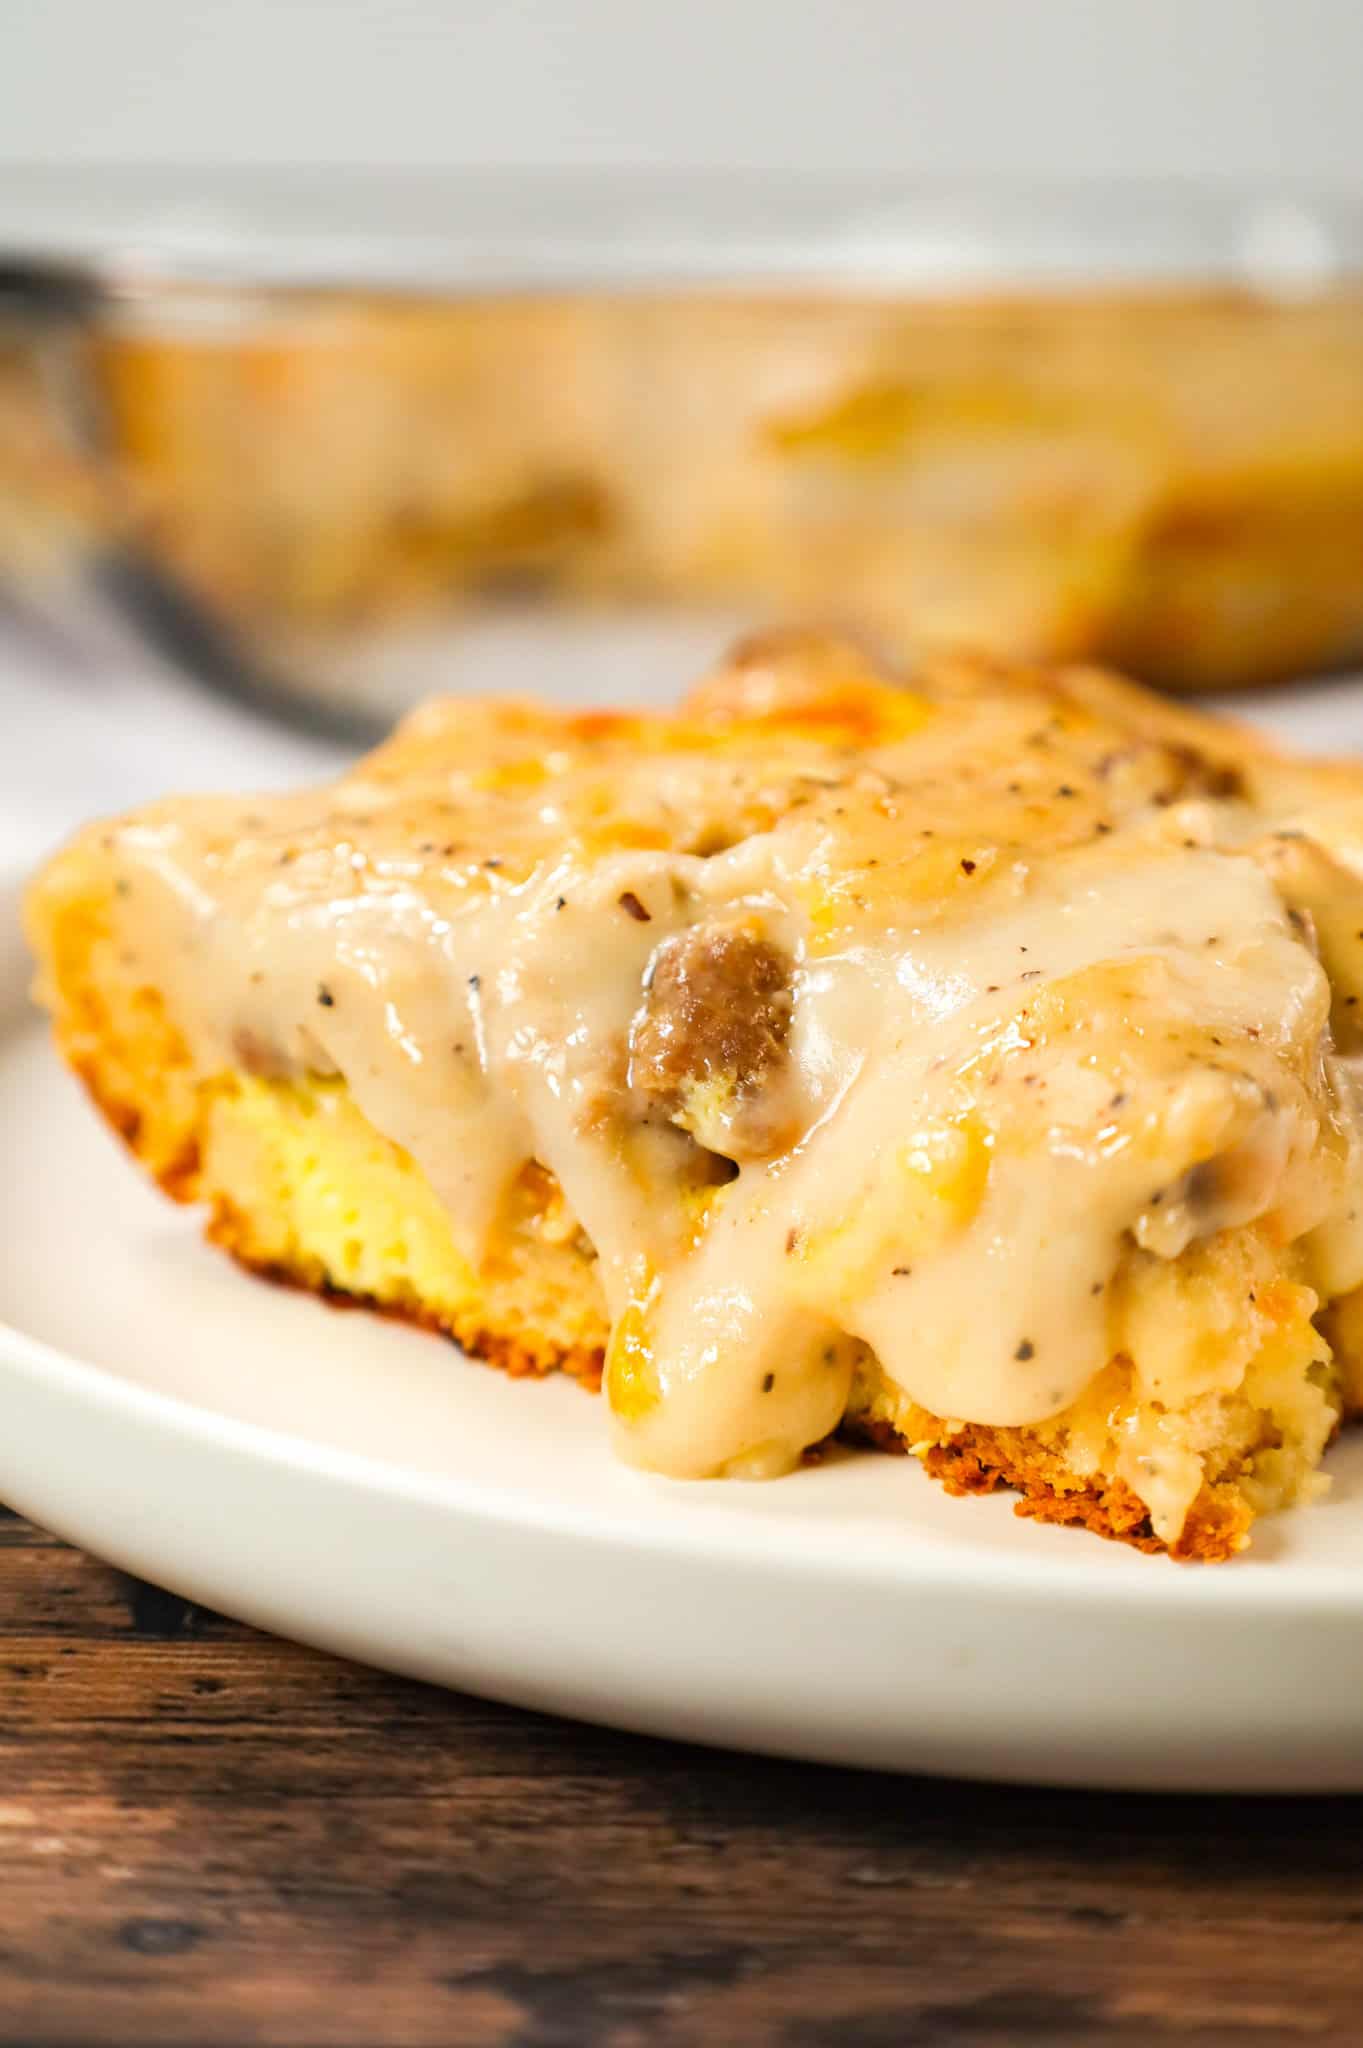 Biscuit and Gravy Casserole is a hearty breakfast dish made with Pillsbury biscuits and loaded with crumbled sausage, cheddar cheese and peppered gravy.